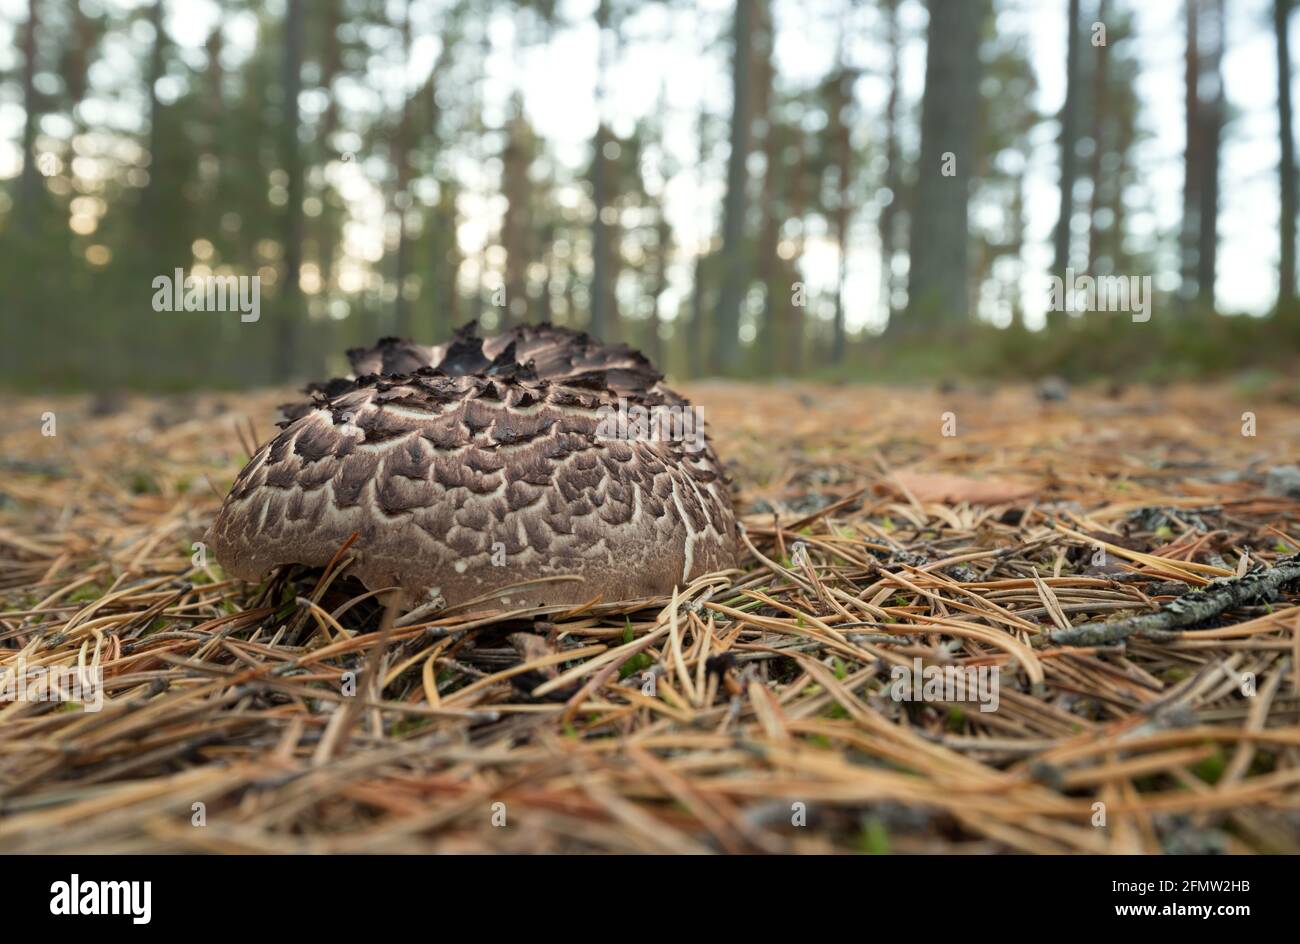 Scaly tooth fungus, Sarcodon squamosus growing in coniferous environmet Stock Photo